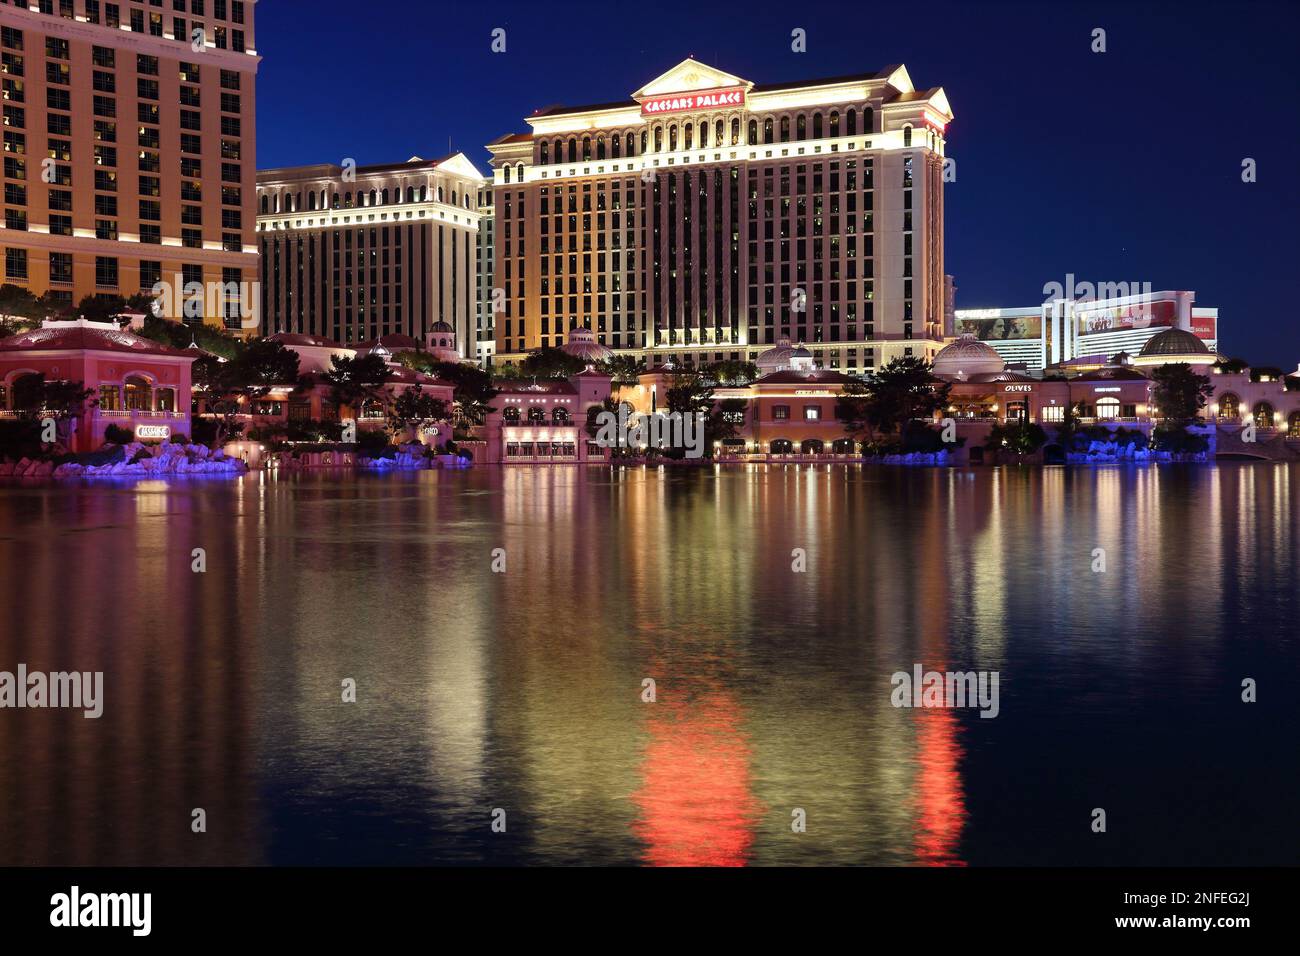 LAS VEGAS, USA - APRIL 14, 2014: Caesars Palace view in Las Vegas. It is among 15 largest hotels in the world with 3,950 and 3,960 rooms respectively. Stock Photo